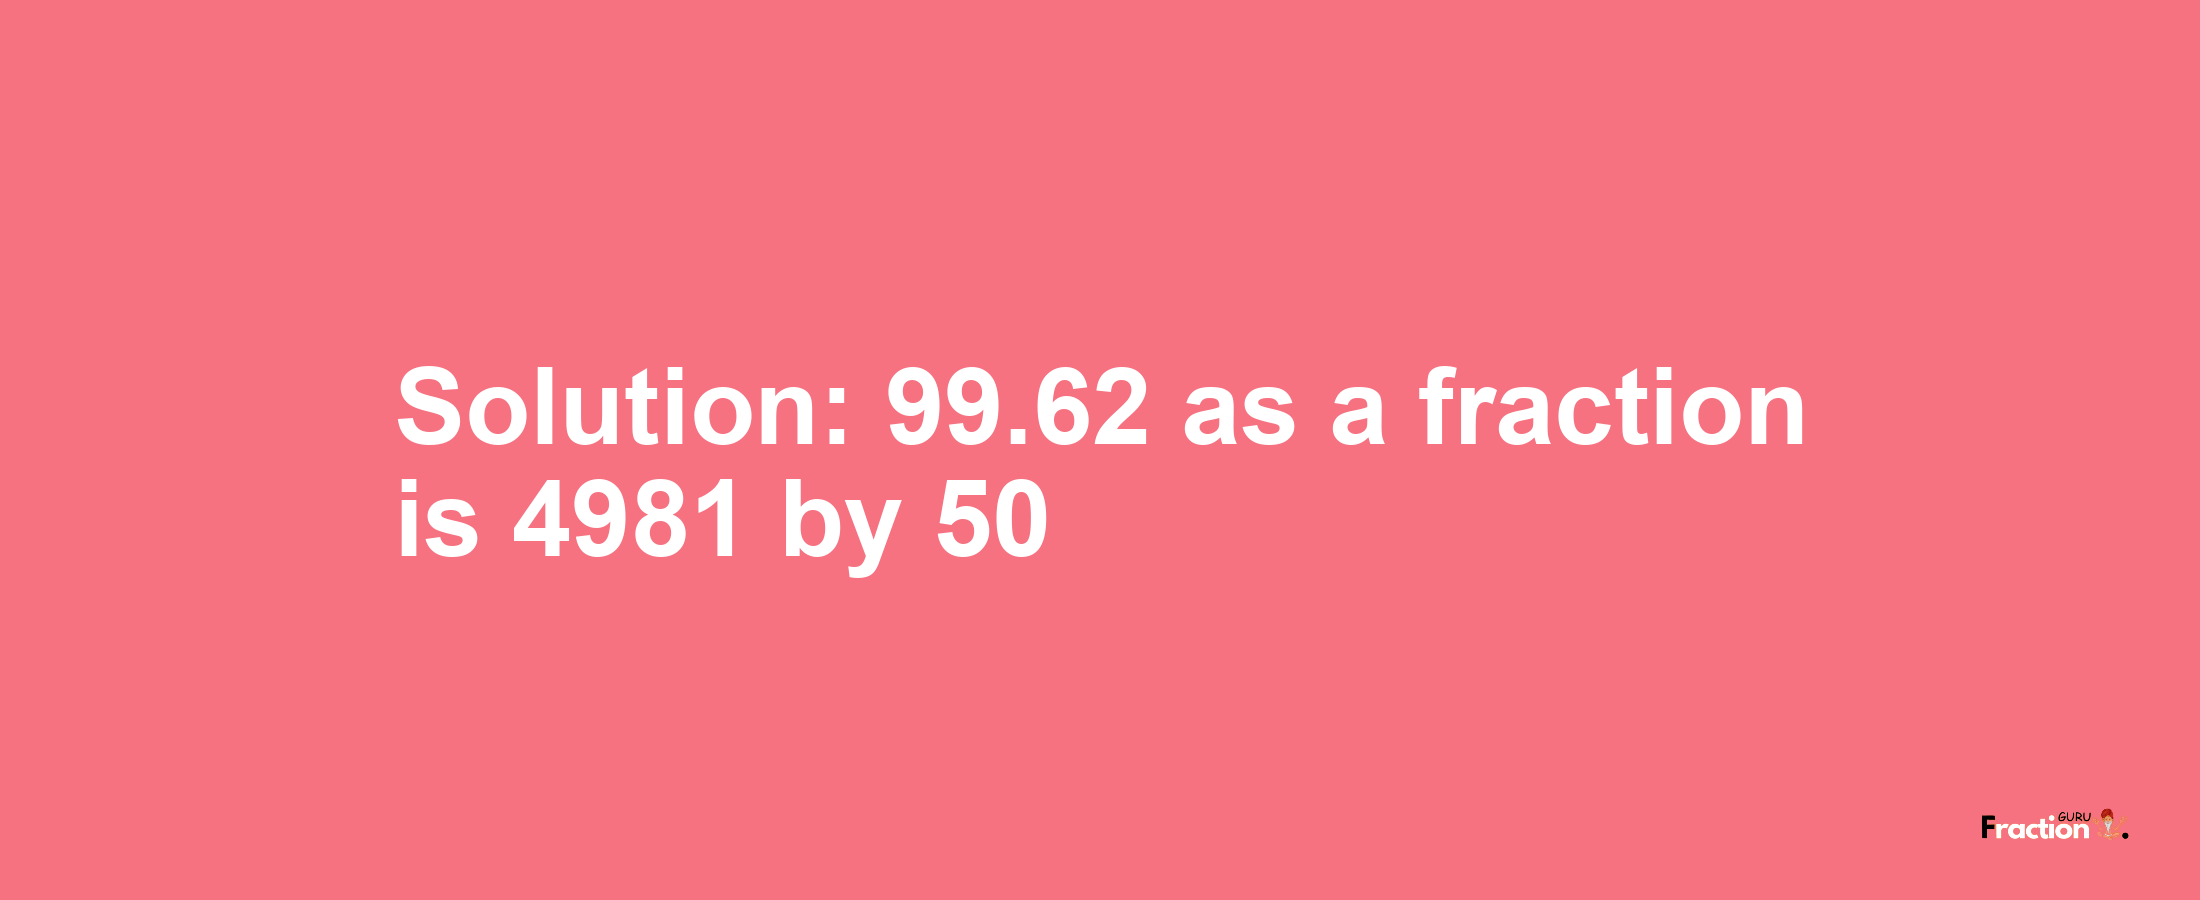 Solution:99.62 as a fraction is 4981/50